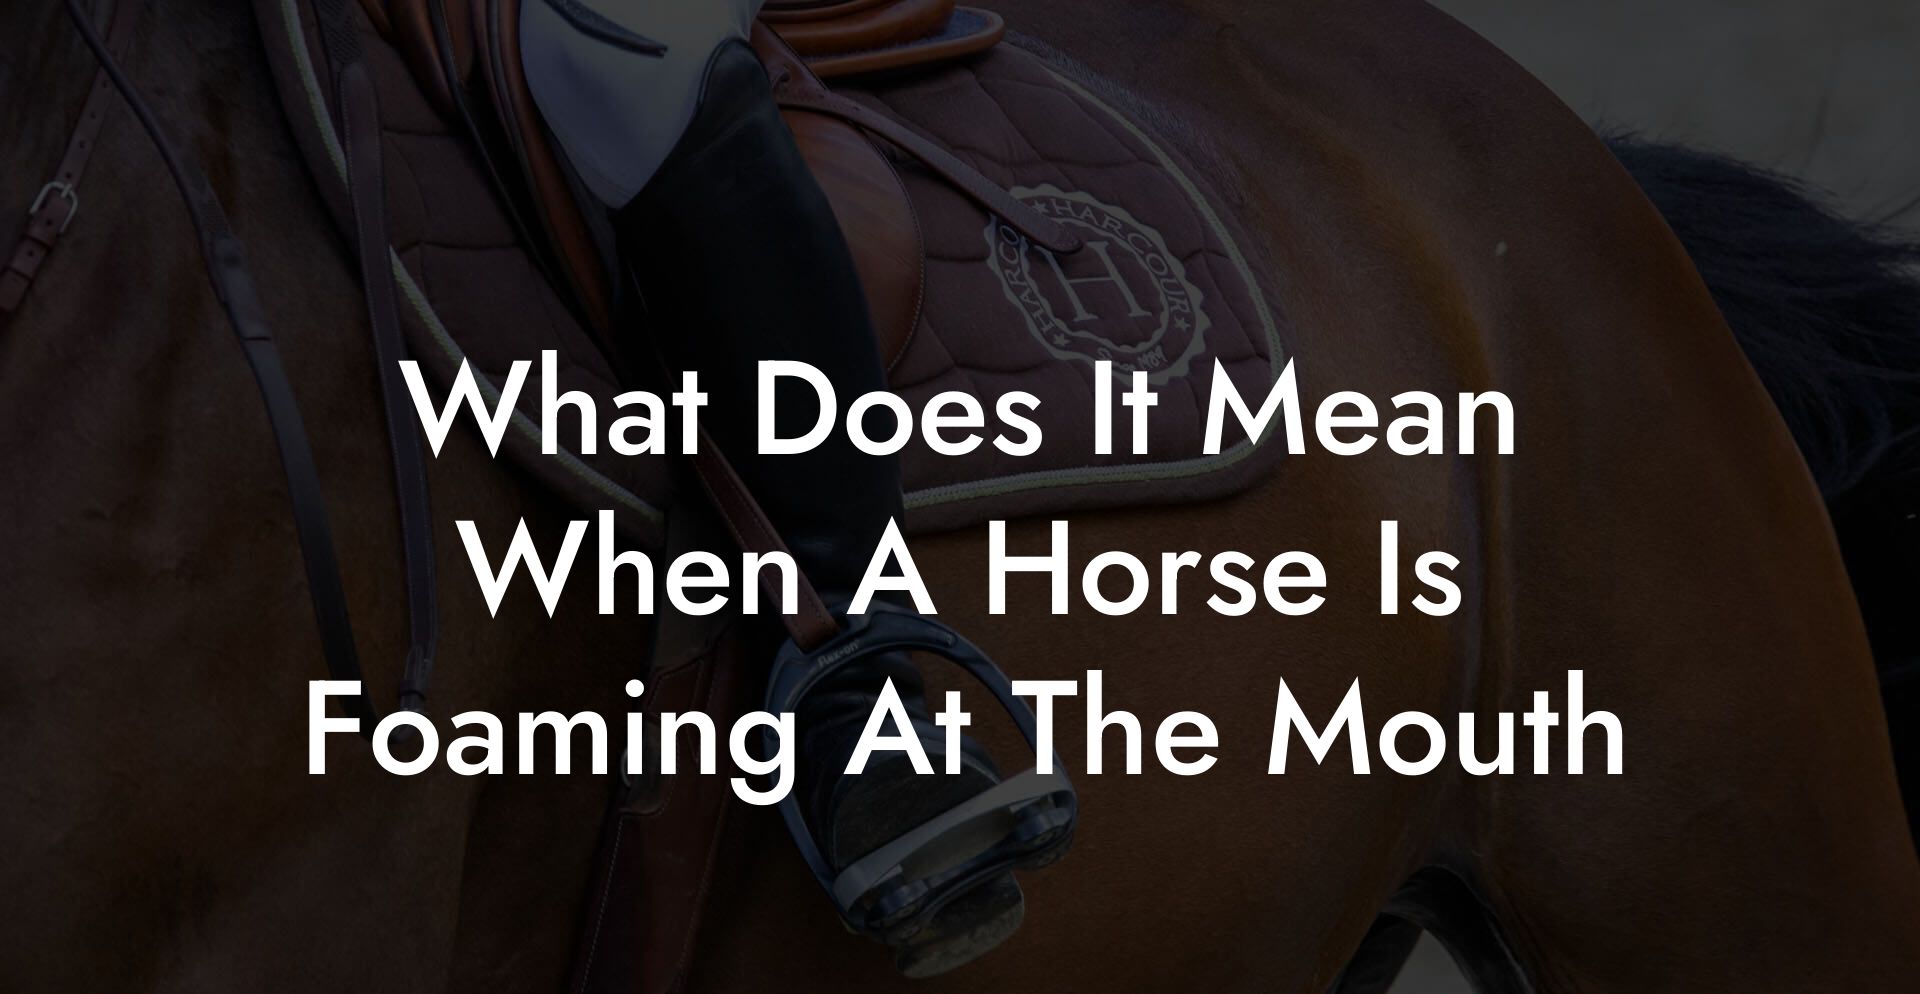 What Does It Mean When A Horse Is Foaming At The Mouth